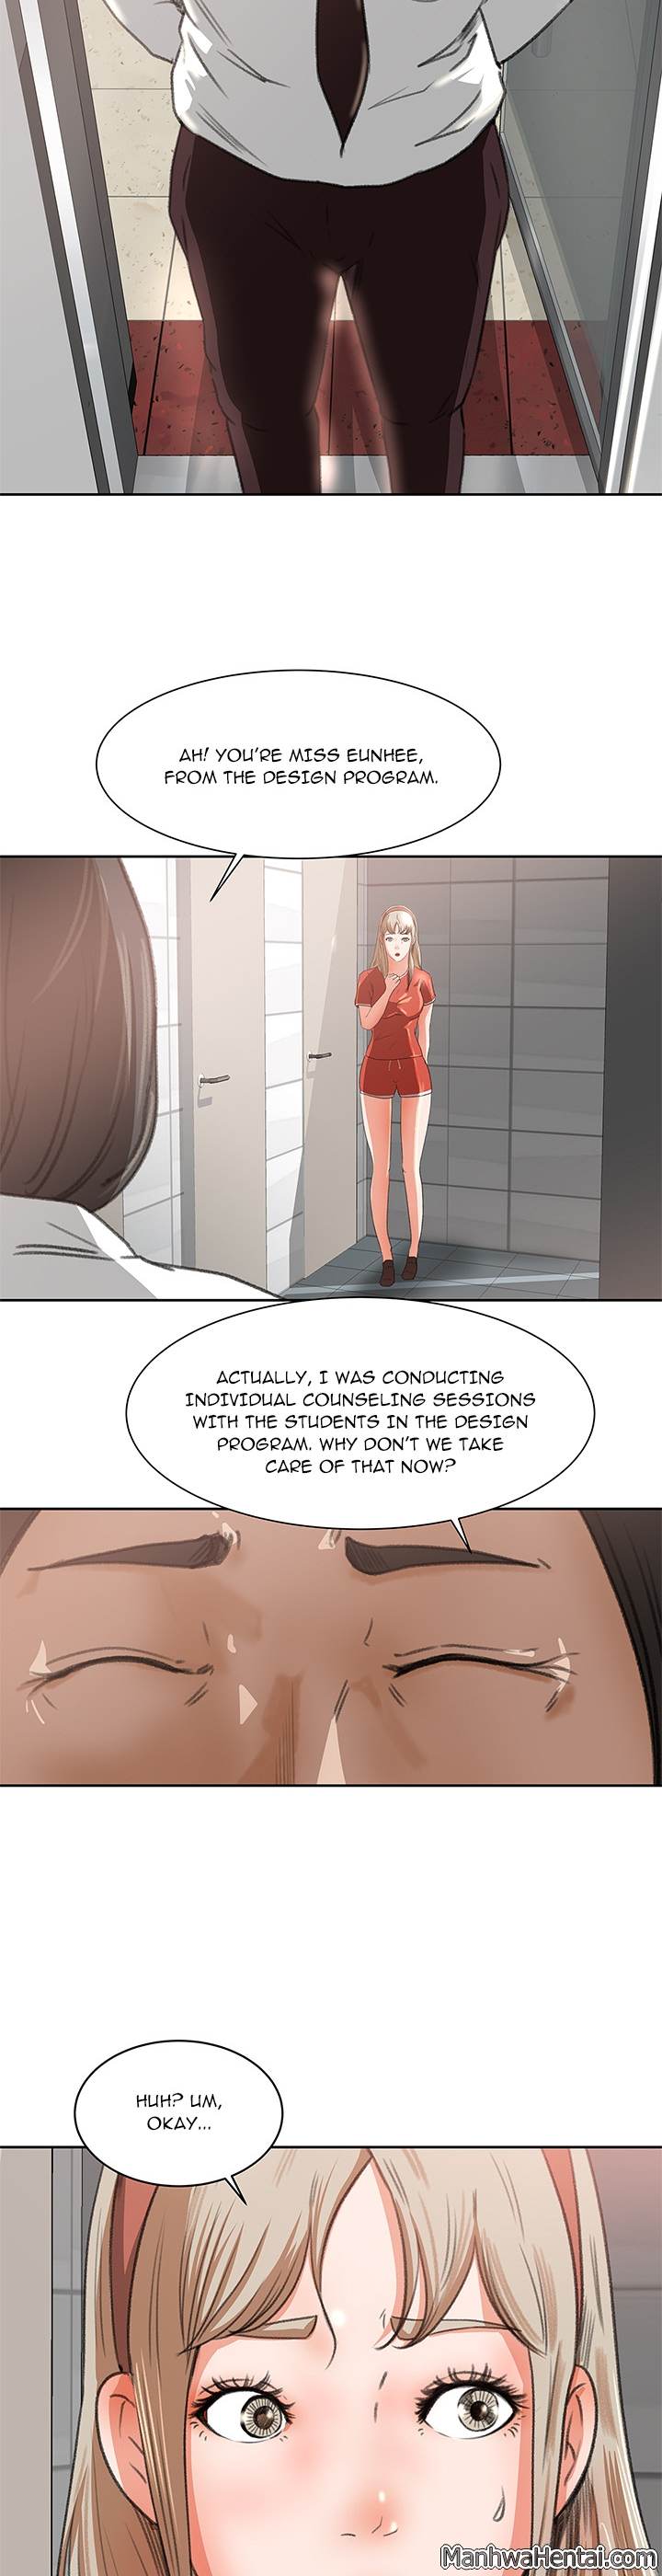 Inside the Uniform - Chapter 8 Page 16